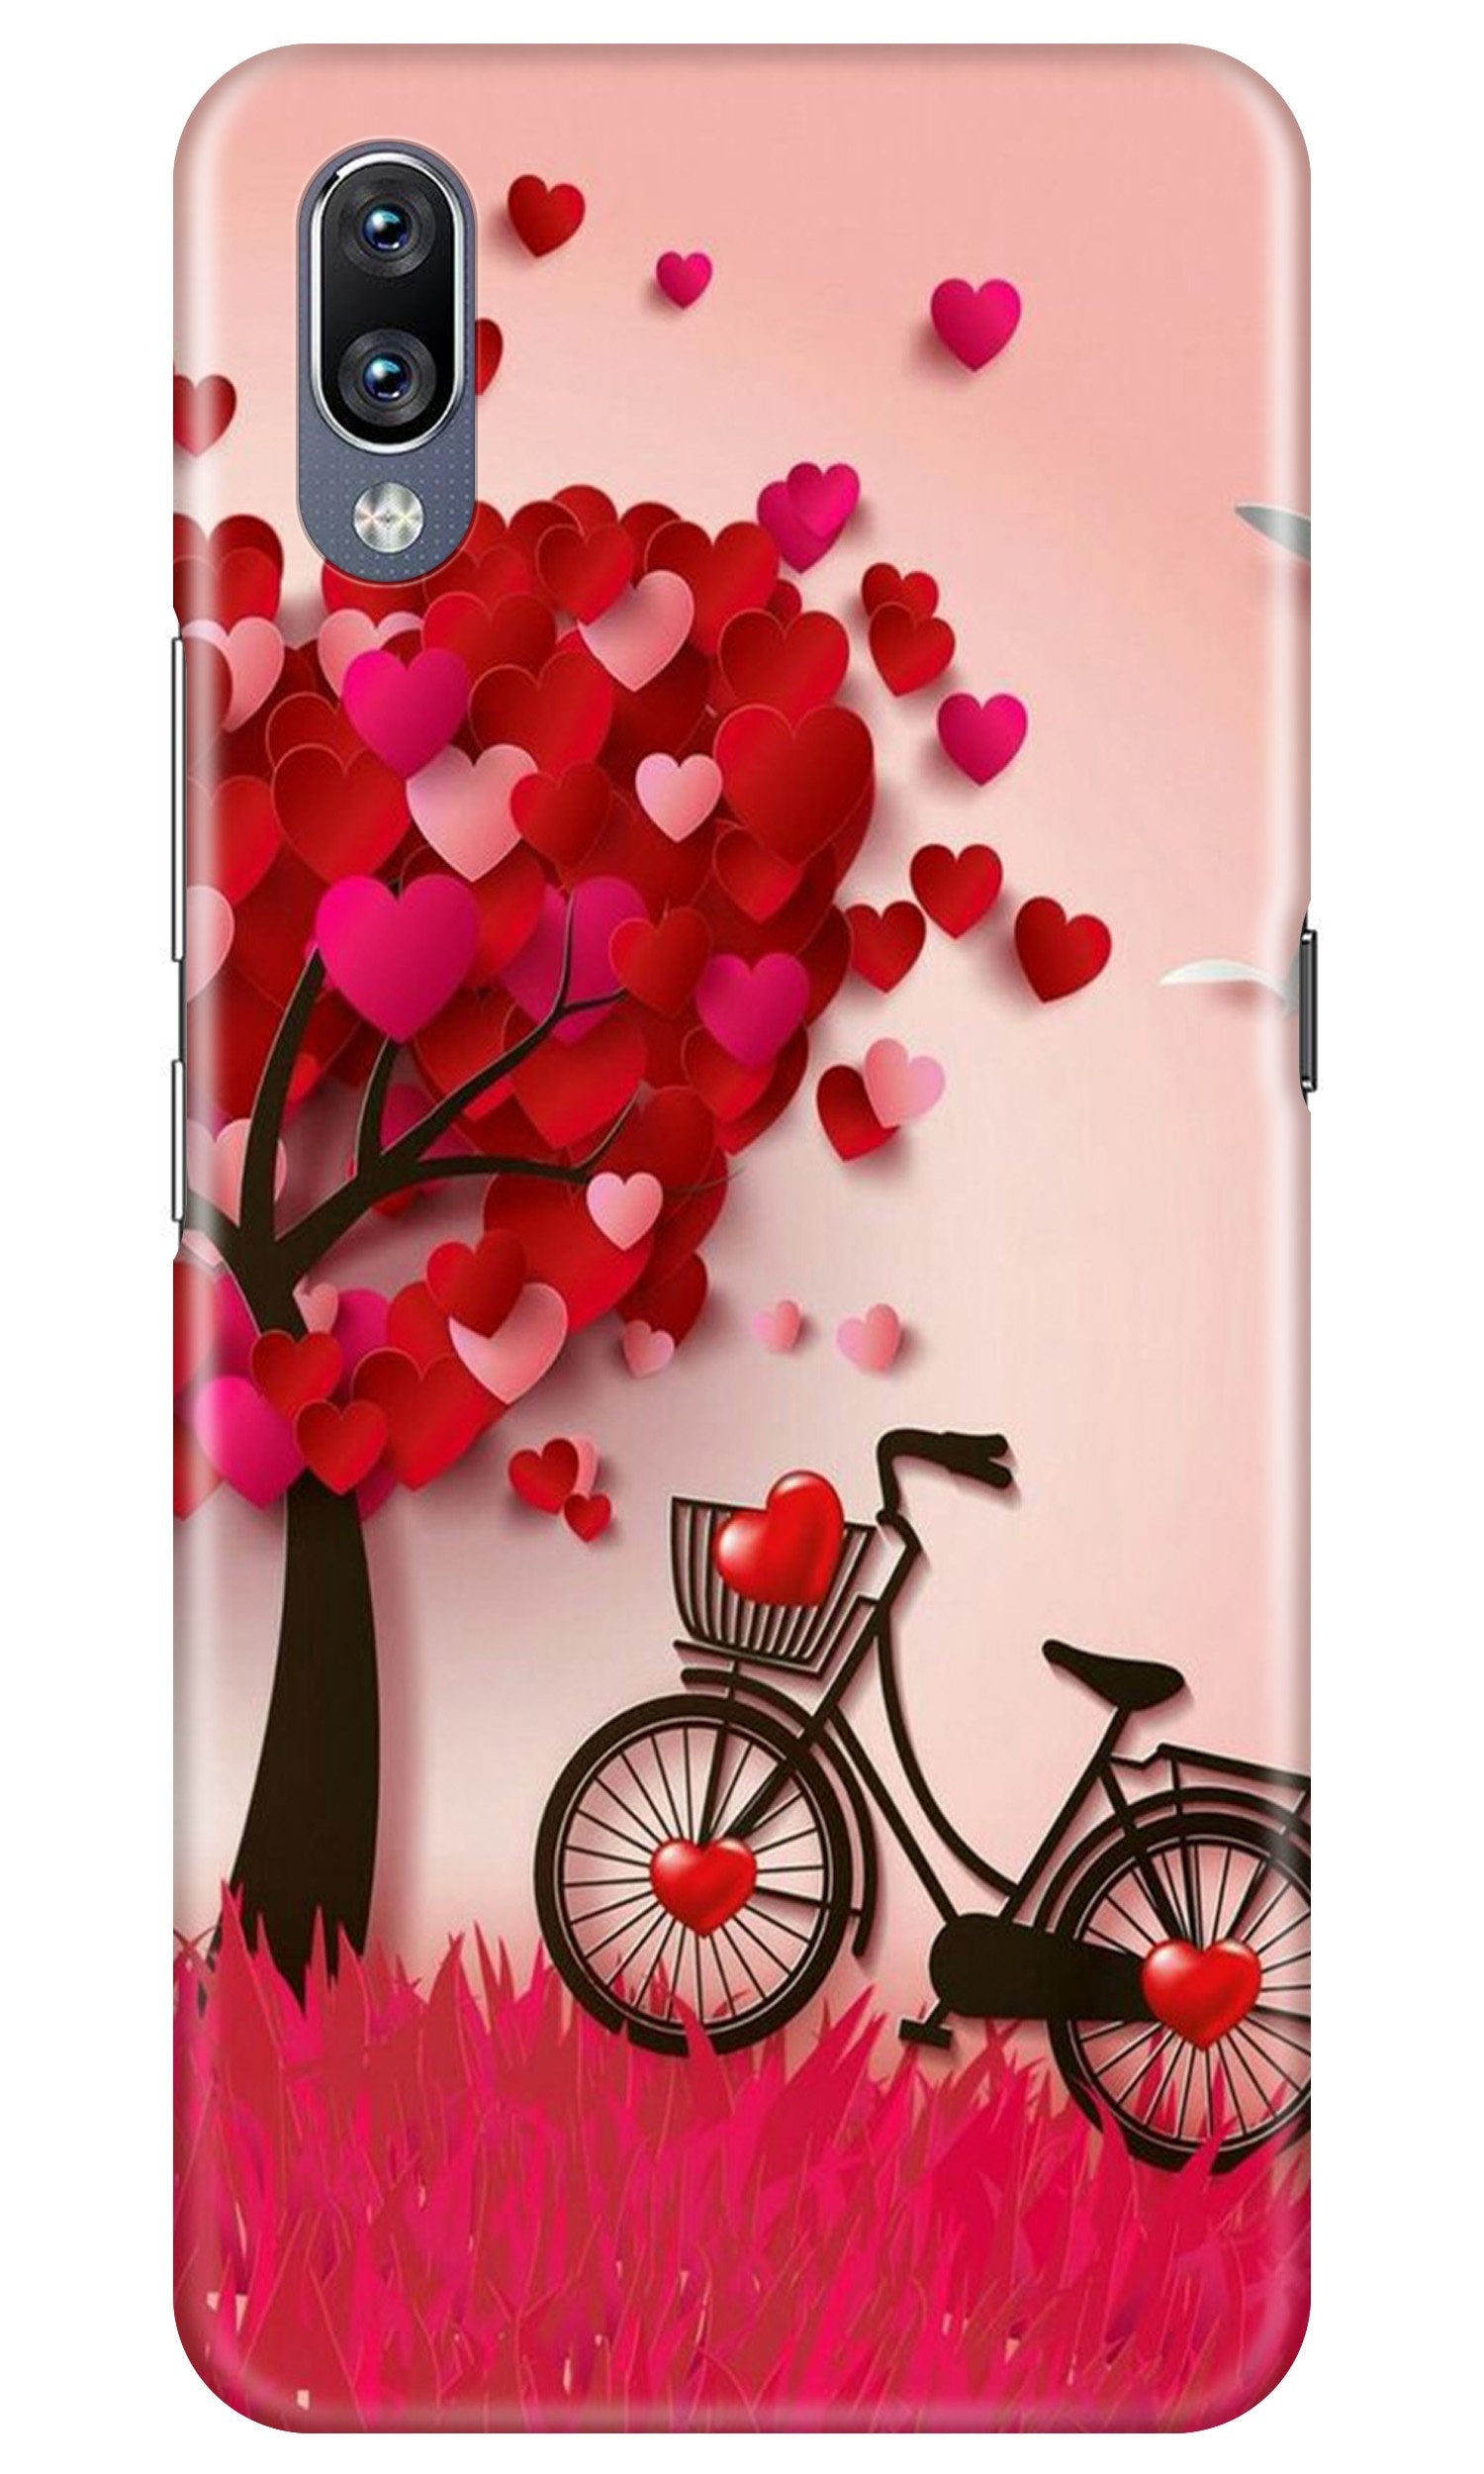 Red Heart Cycle Case for Vivo V11 Pro (Design No. 222)